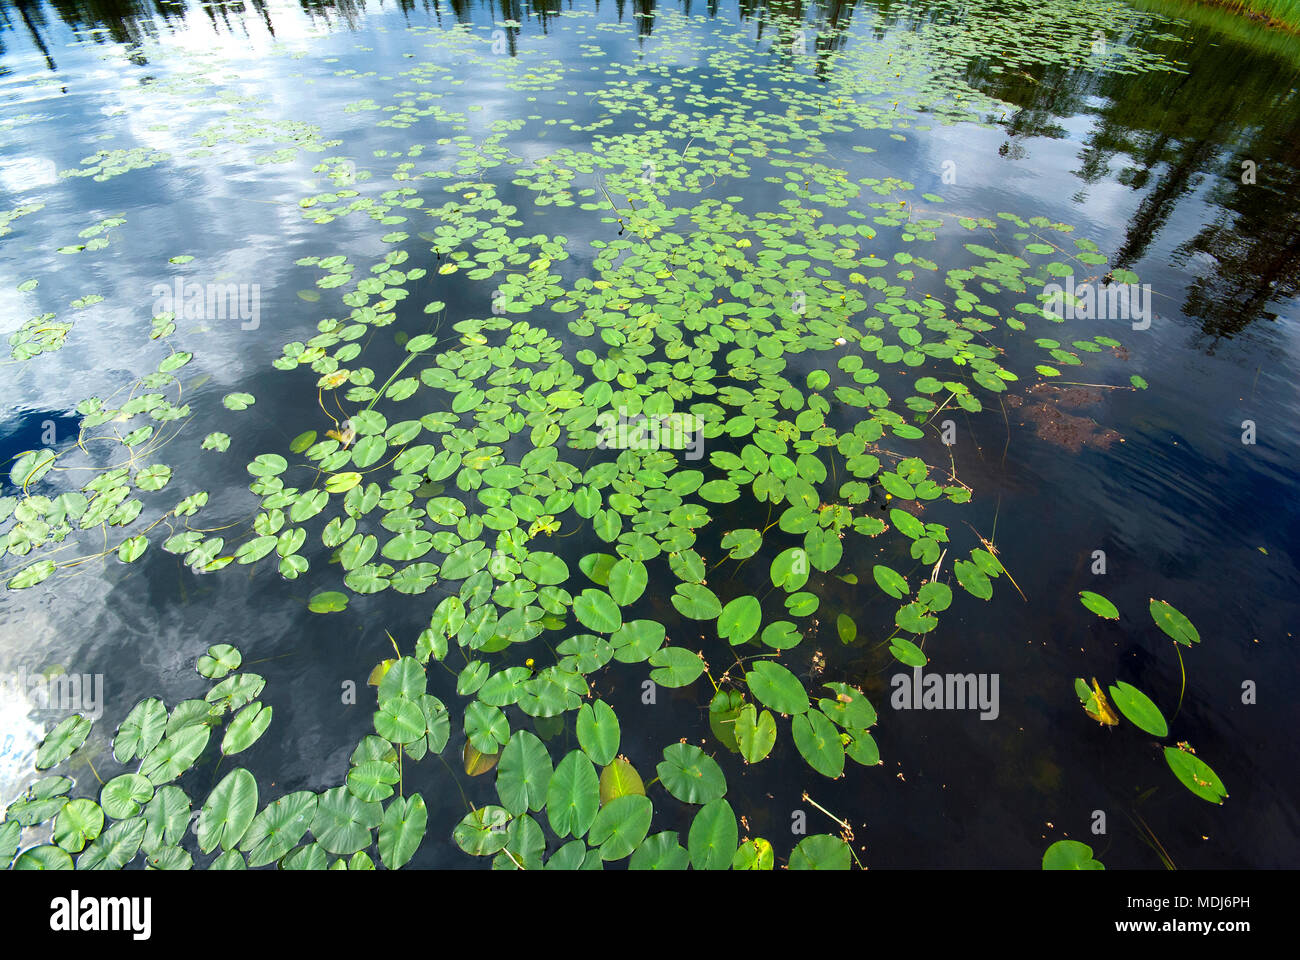 Water lily leaves (Nymphaea) in a small lake, Swedish Lapland near Gallivare, Norrbotten County, Sweden Stock Photo